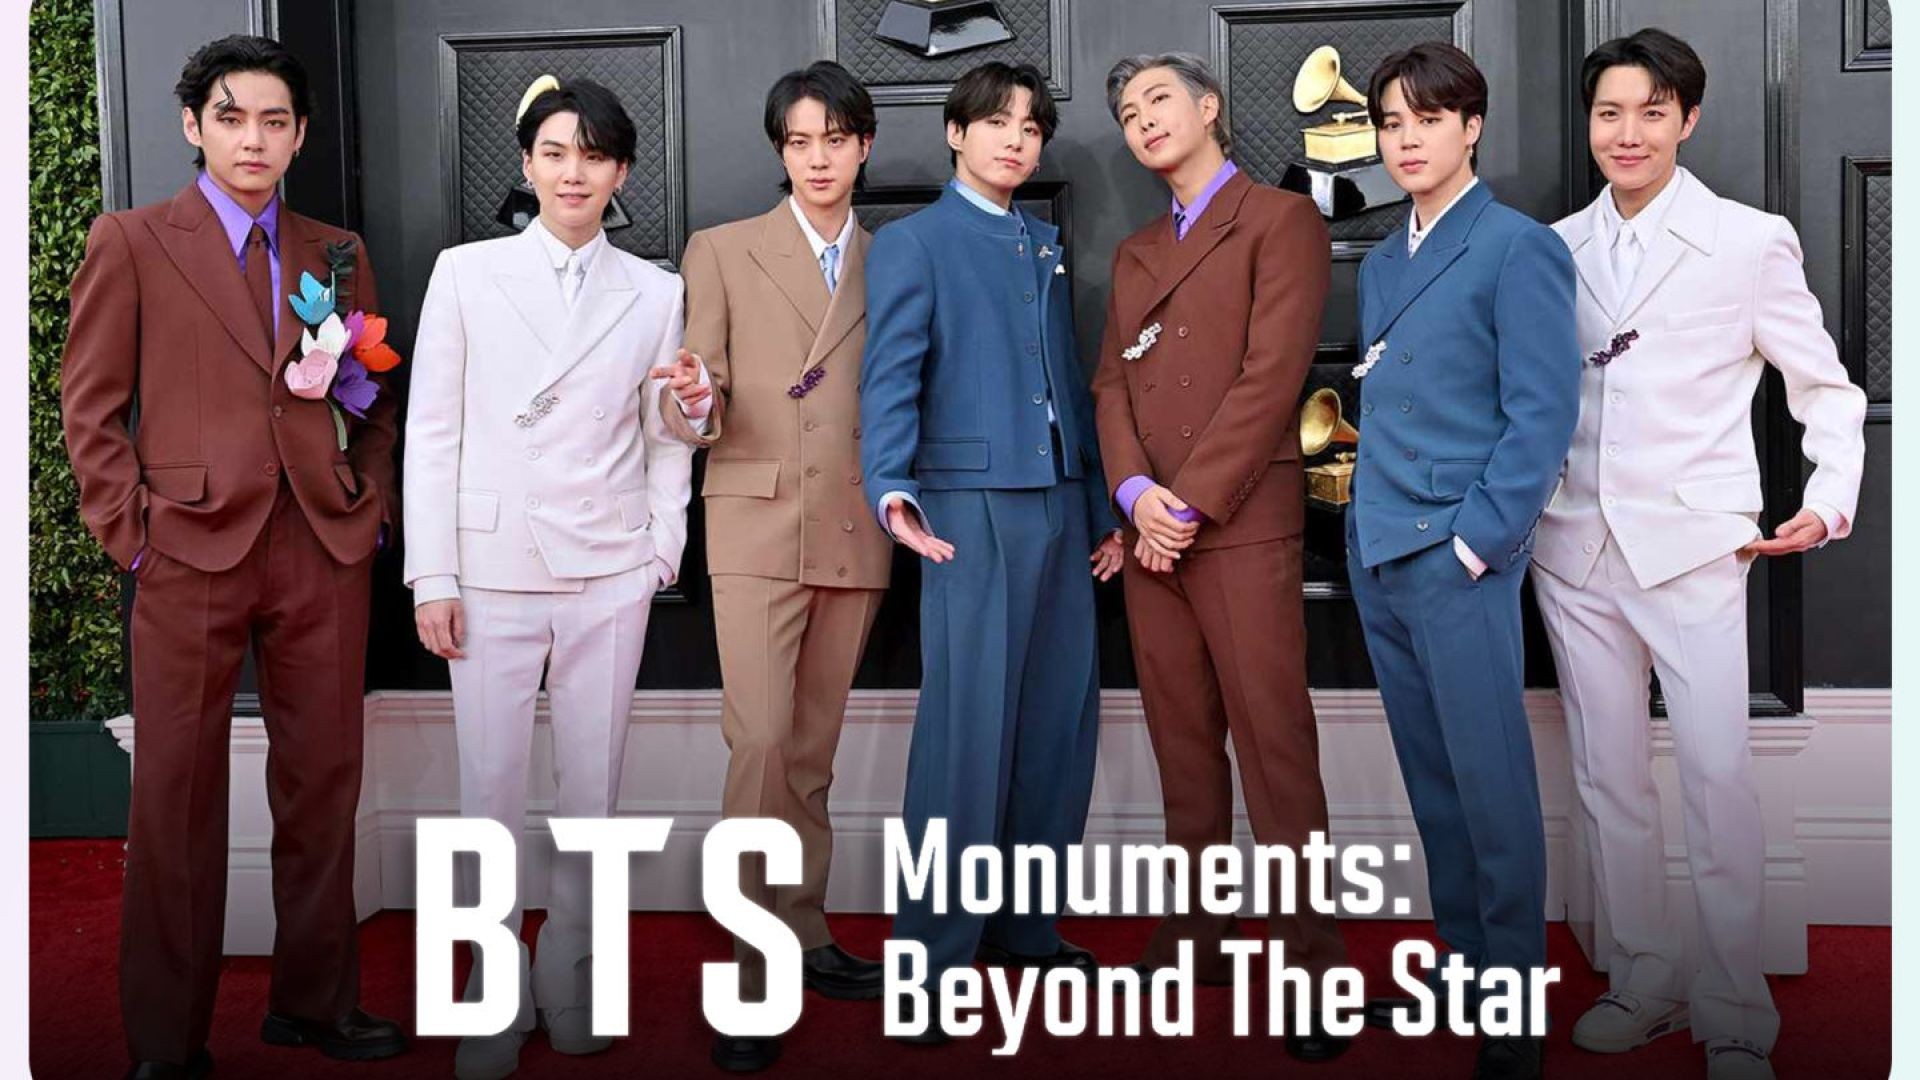 ⁣ep  4 - Disconnected - BTS Monuments: Beyond The Star